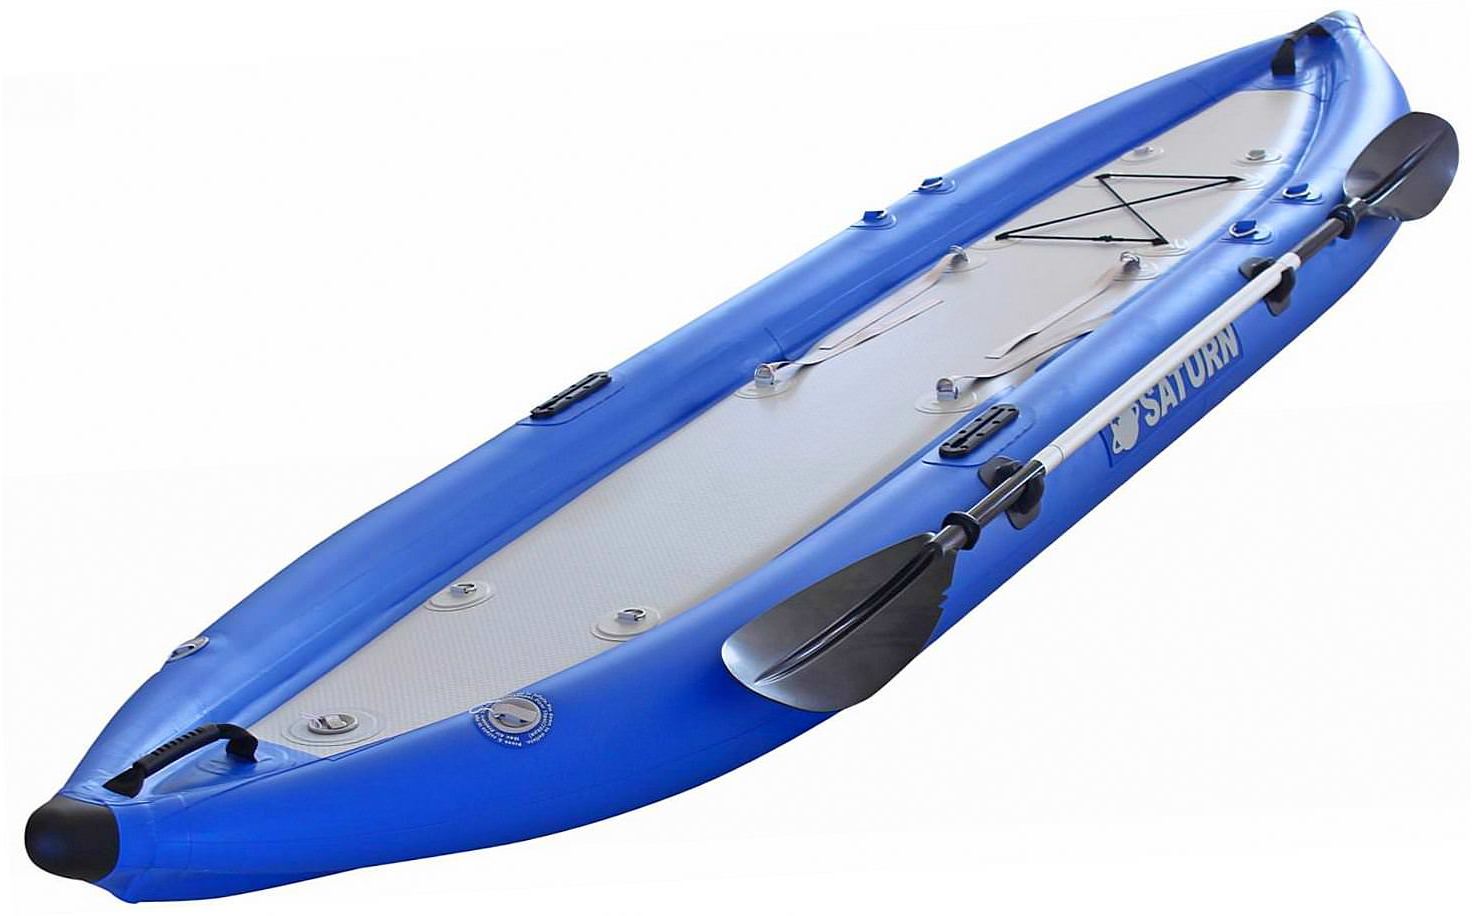 Top 25 Best Two Person Tandem Fishing Kayaks